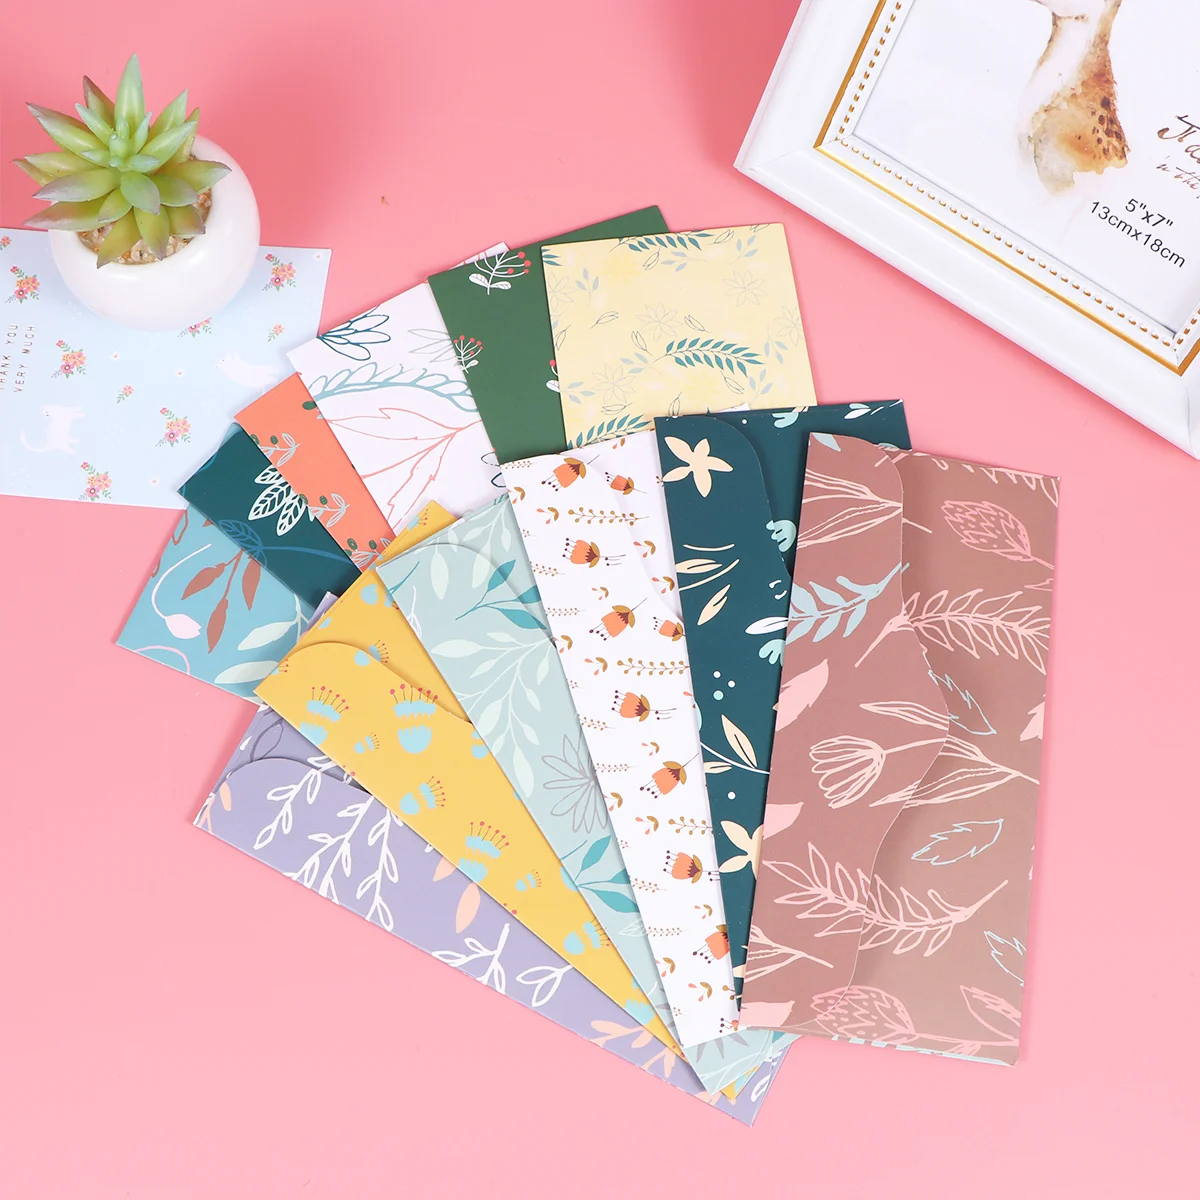 

12pcs Budget Envelopes Assorted Waterproof Thick Creative Cash Envelopes Budget Envelopes for Saving Money Budgeting